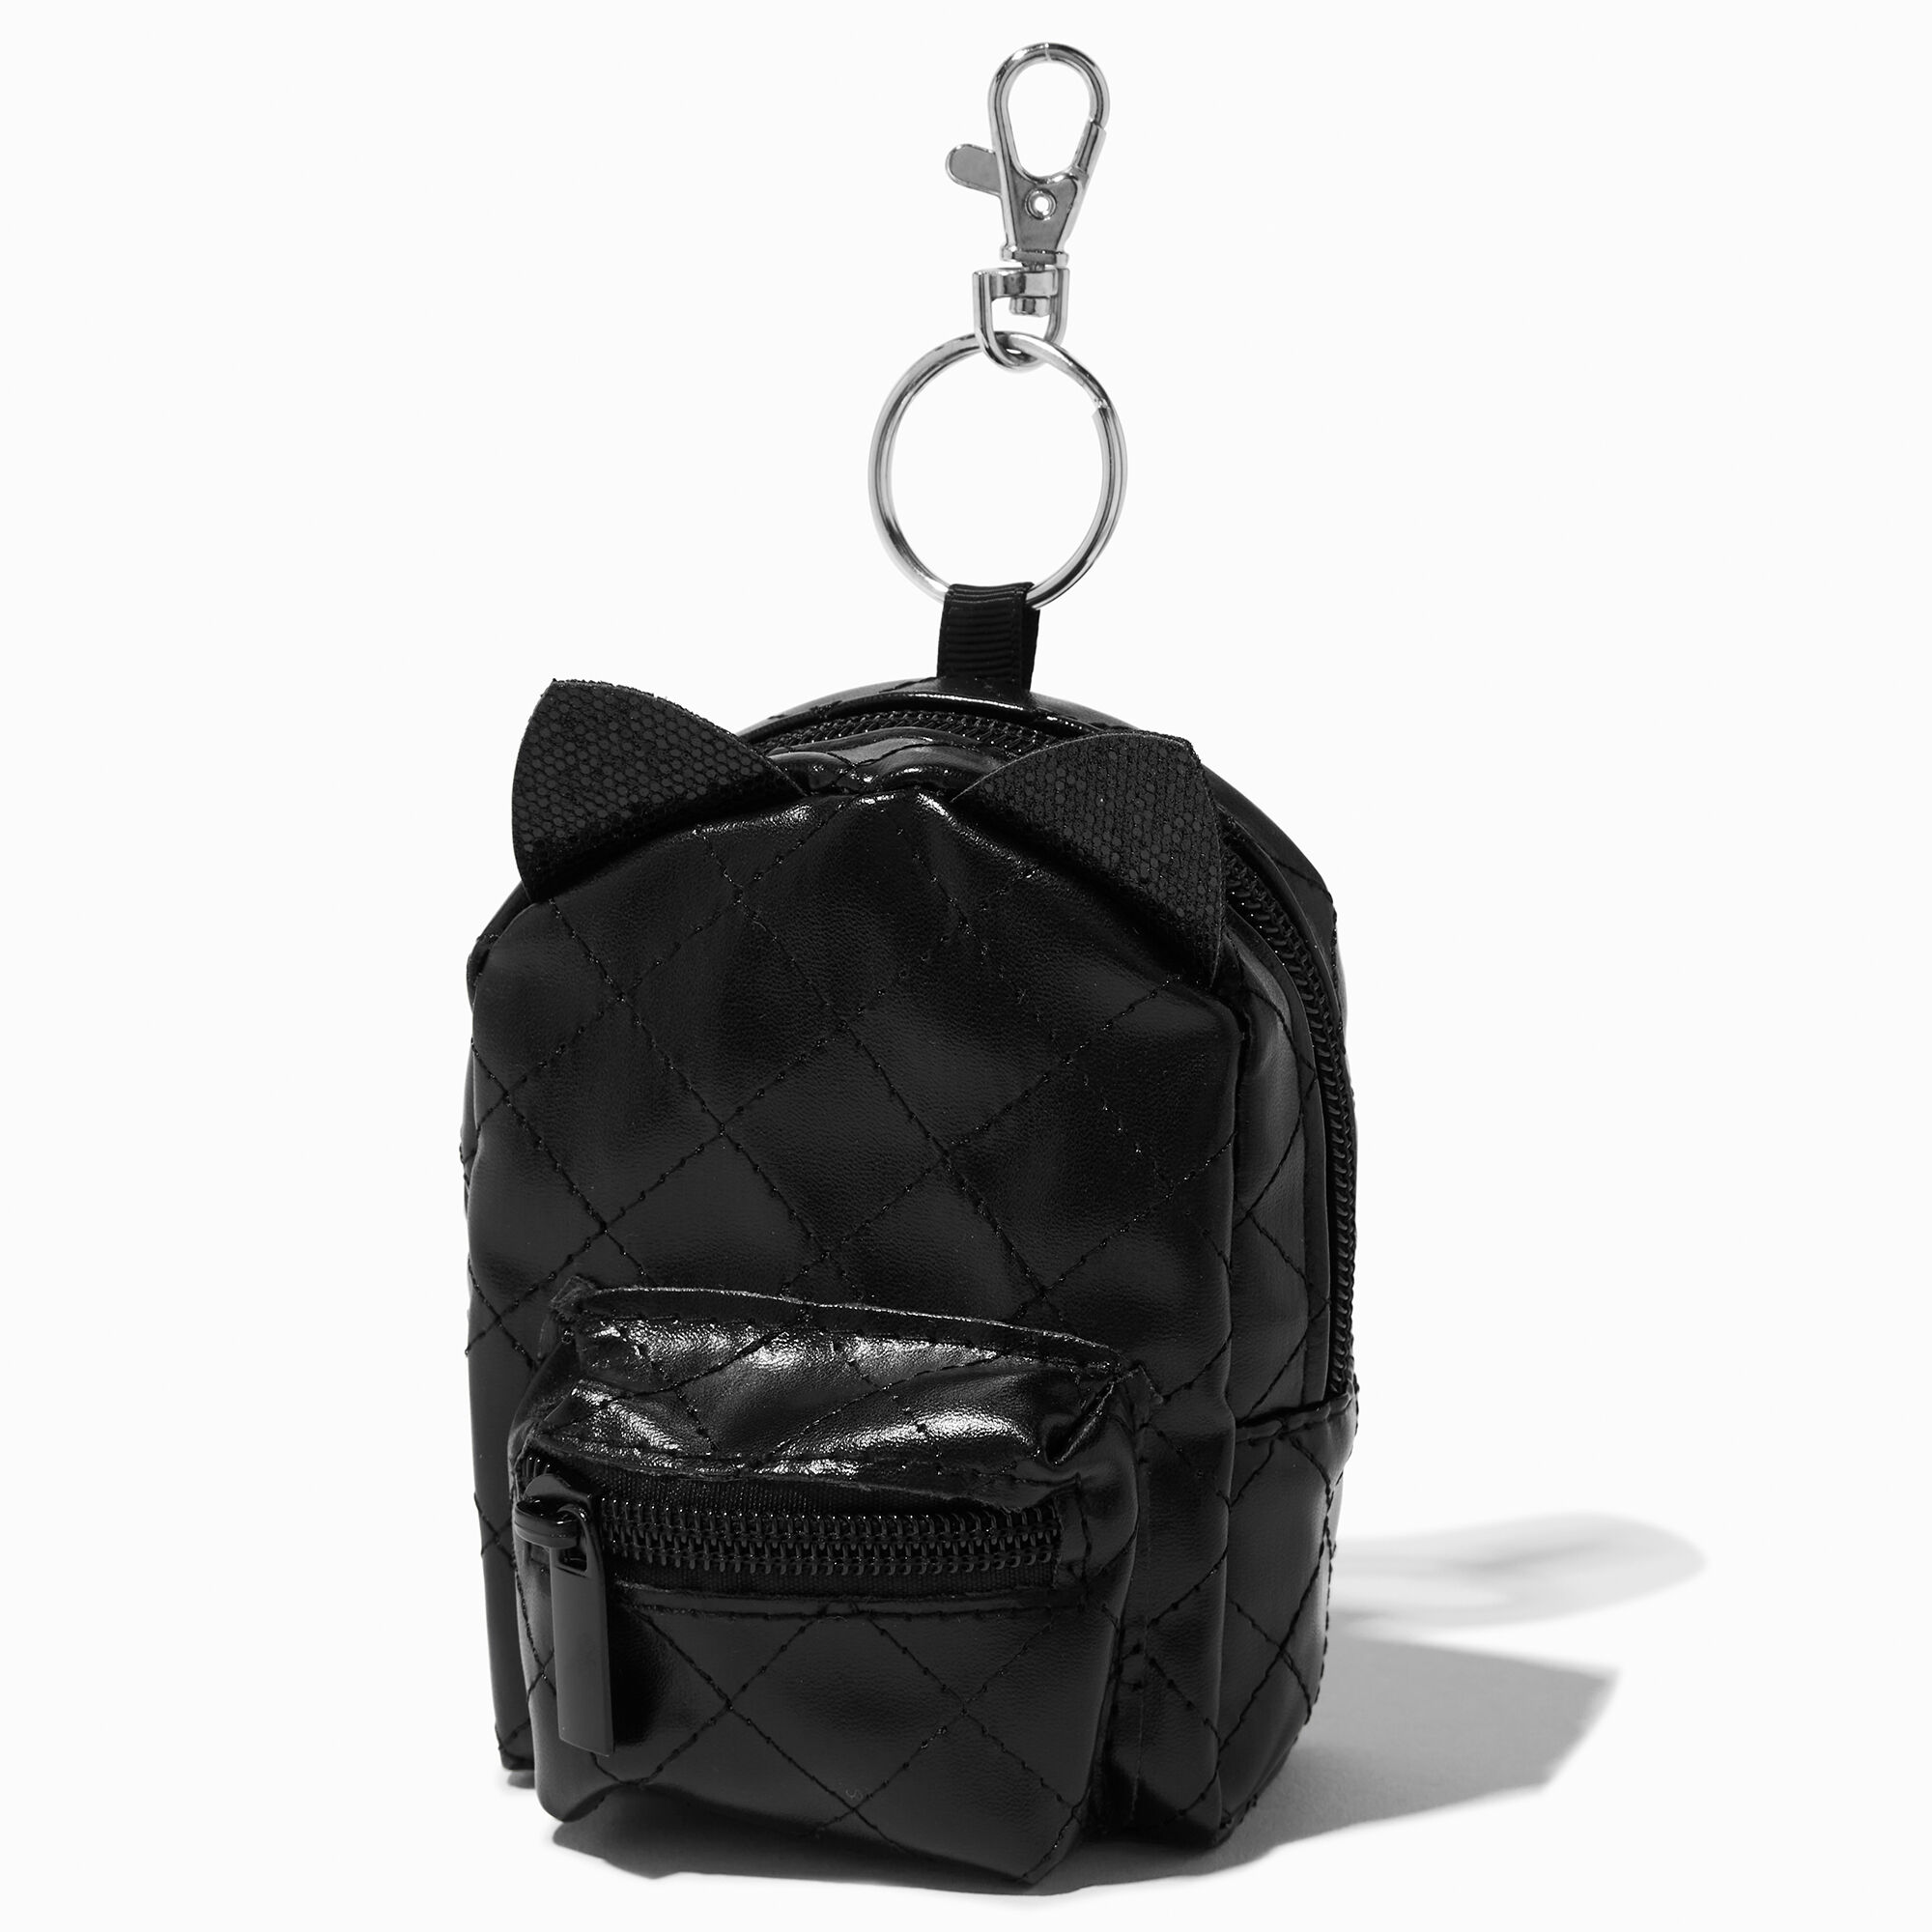 View Claires Cat Plush Mini Backpack Keyring Black information